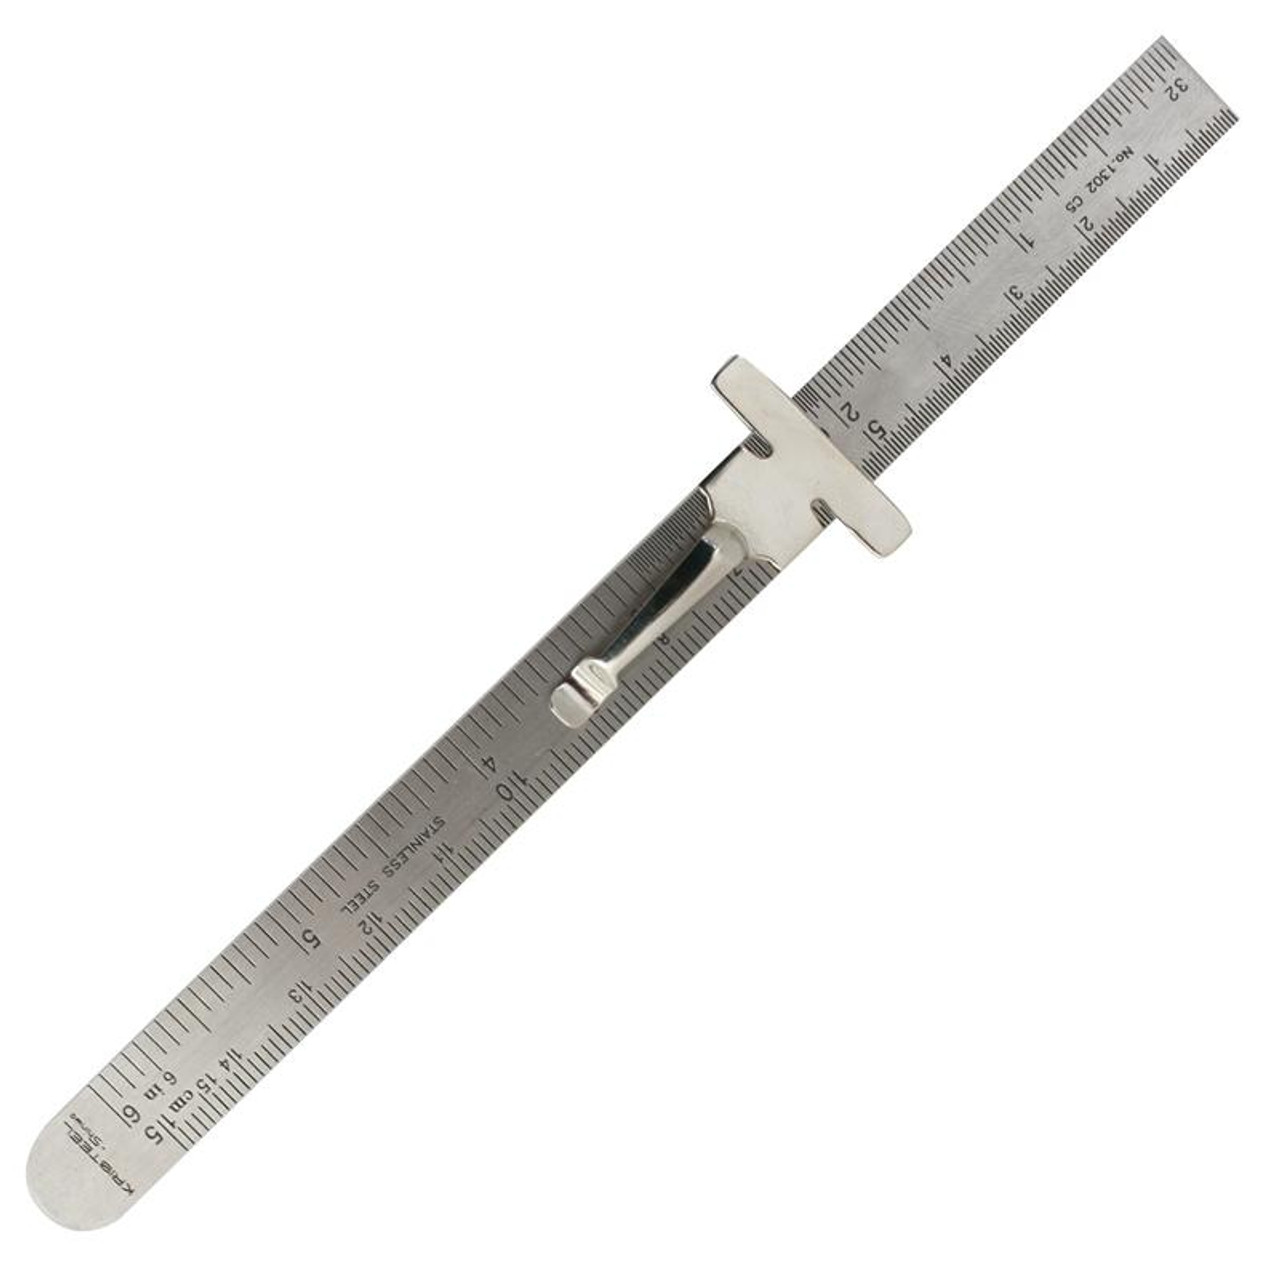 6-inch-15cm-150mm-stainless-steel-ruler-gauge-with-inch-to-mm-conversion-chart-and-depth-gauge